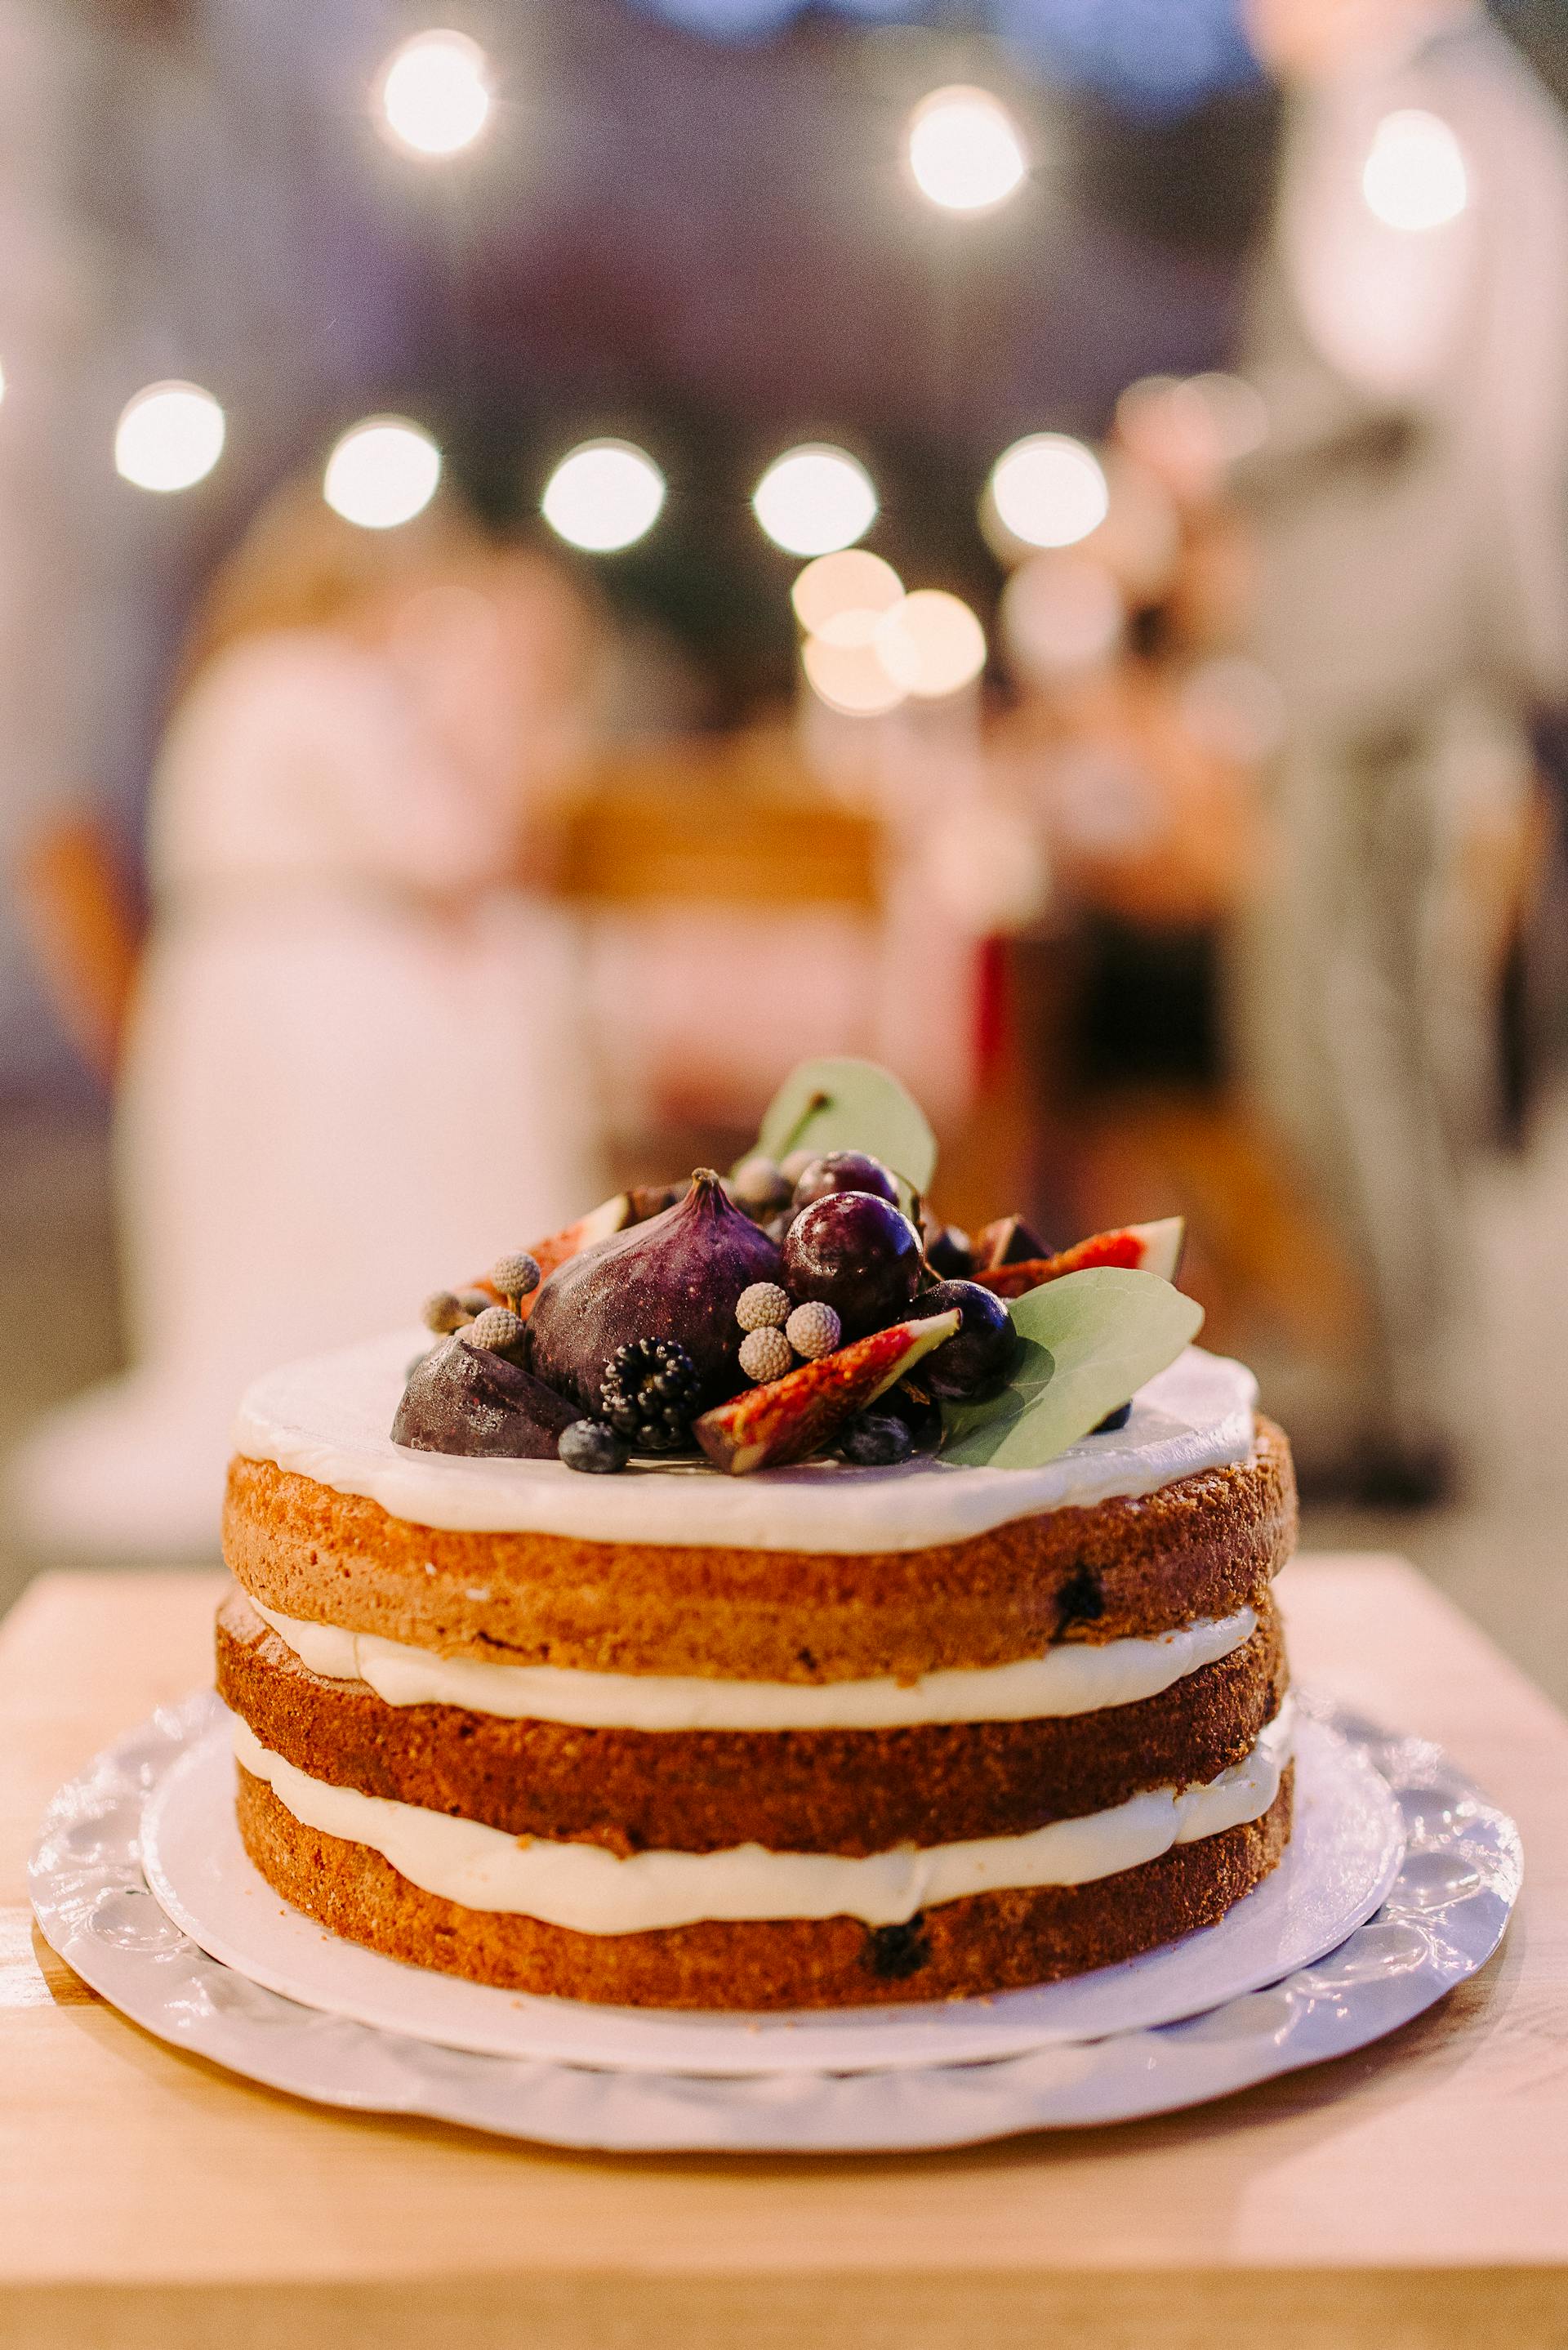 A cake covered with fruit | Source: Pexels